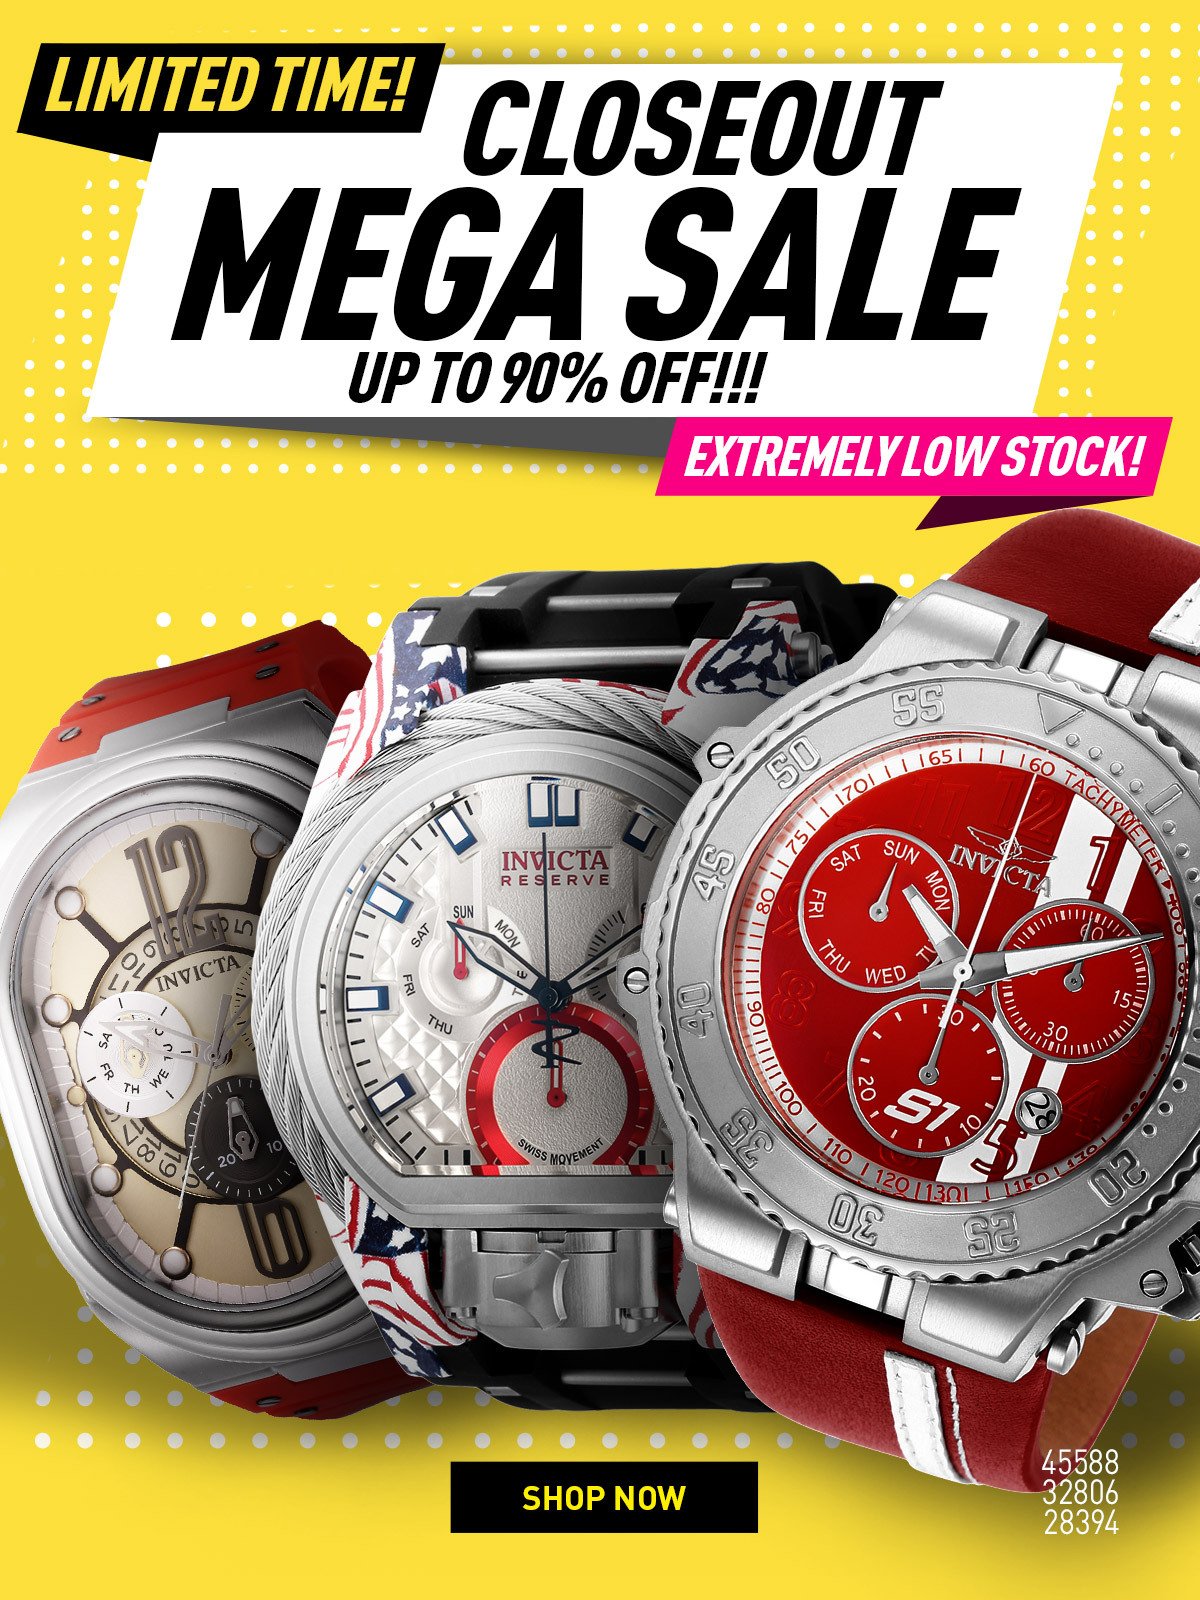 Closeout Mega Sale - Extremely Low Stock! Limited Time!